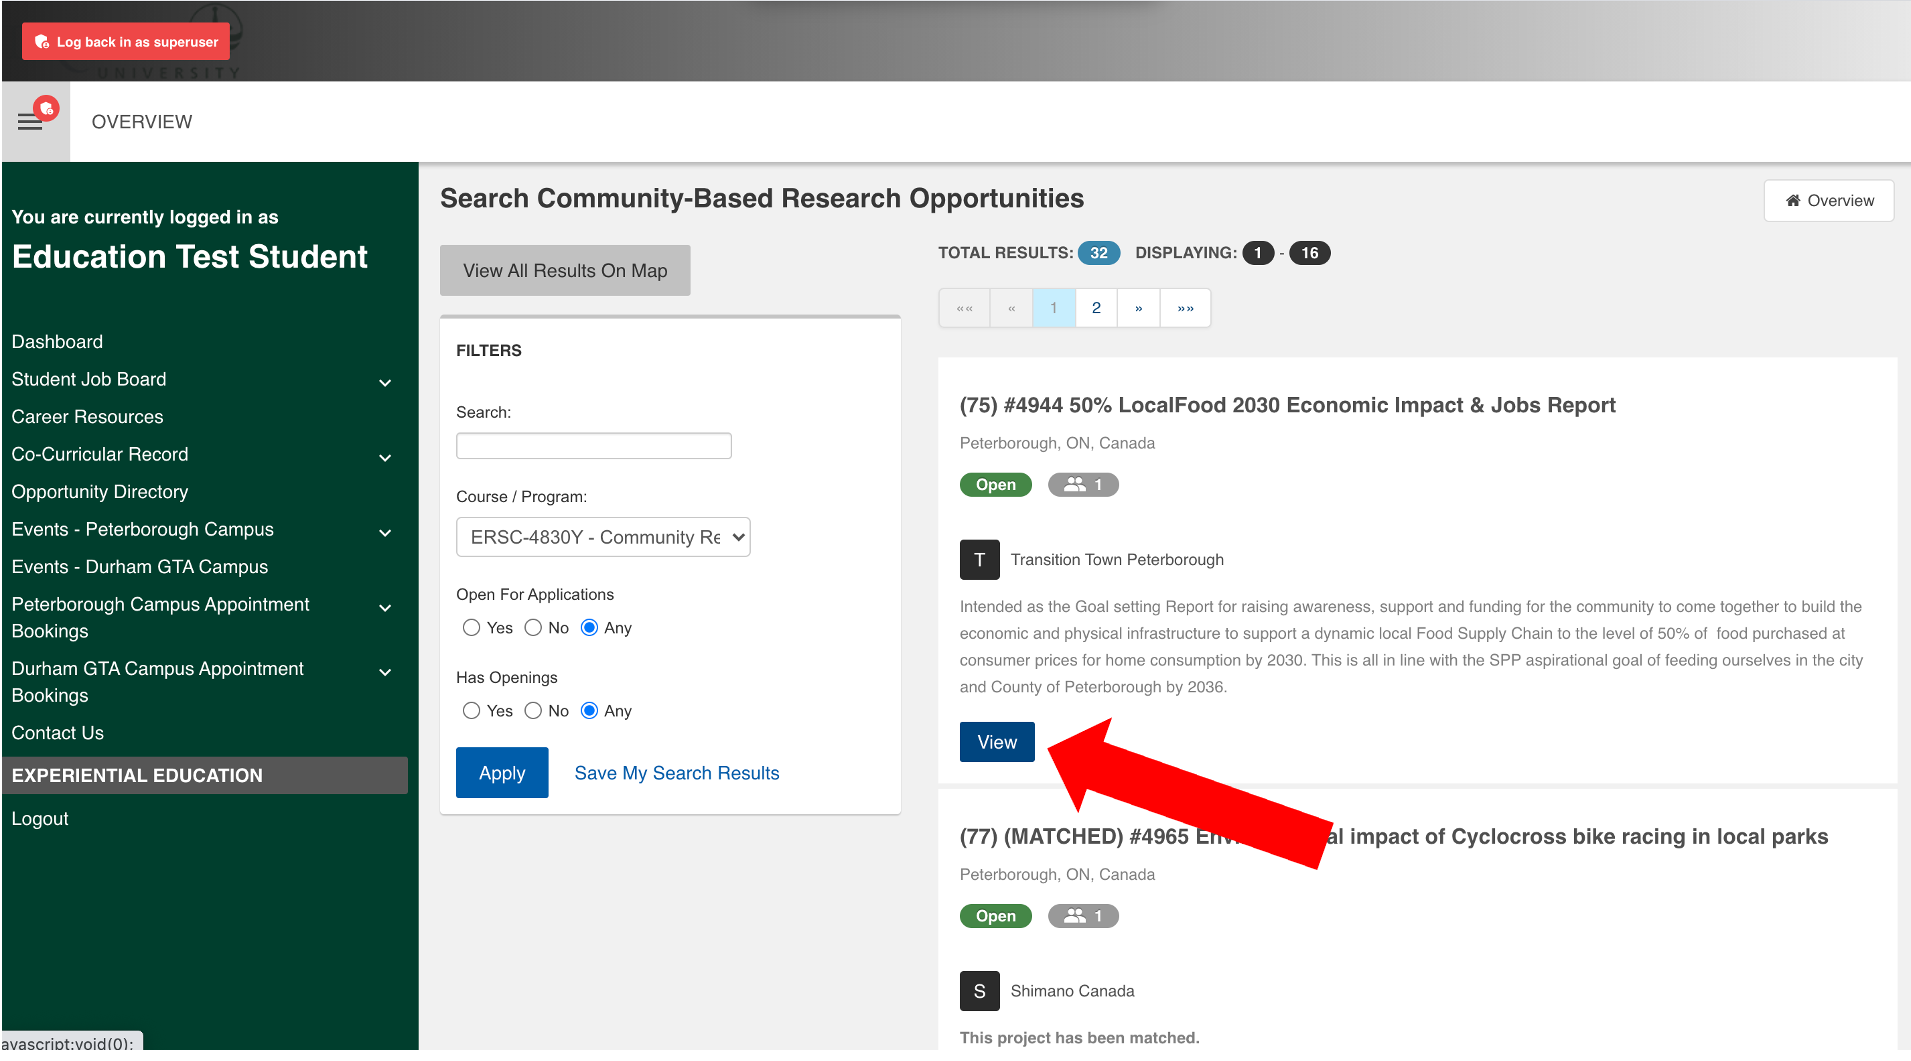 Screenshot of the "Search Community-Based Research Opportunities" with a red arrow pointing towards "View" on an opportunity. 